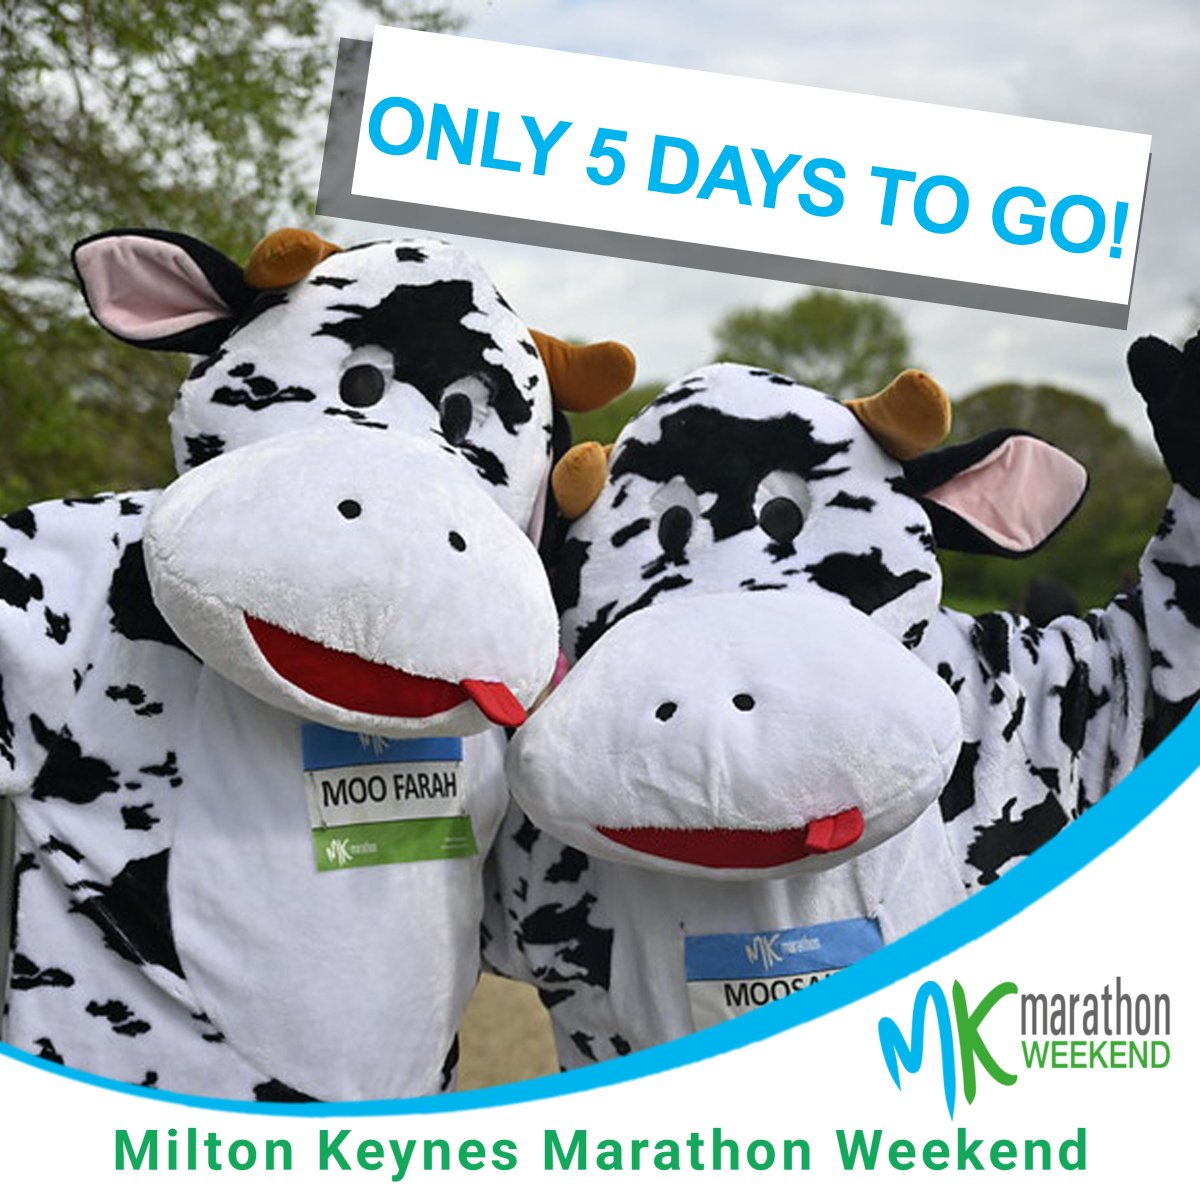 🚨5 DAYS TO GO!!🚨 We are counting down the days! 🏃‍♂️🏃‍♀️ We cannot wait to welcome our talented runners and amazing volunteers! For more race details, please check our race guides 👇 mkmarathon.com/event-guide/ #MKMarathon